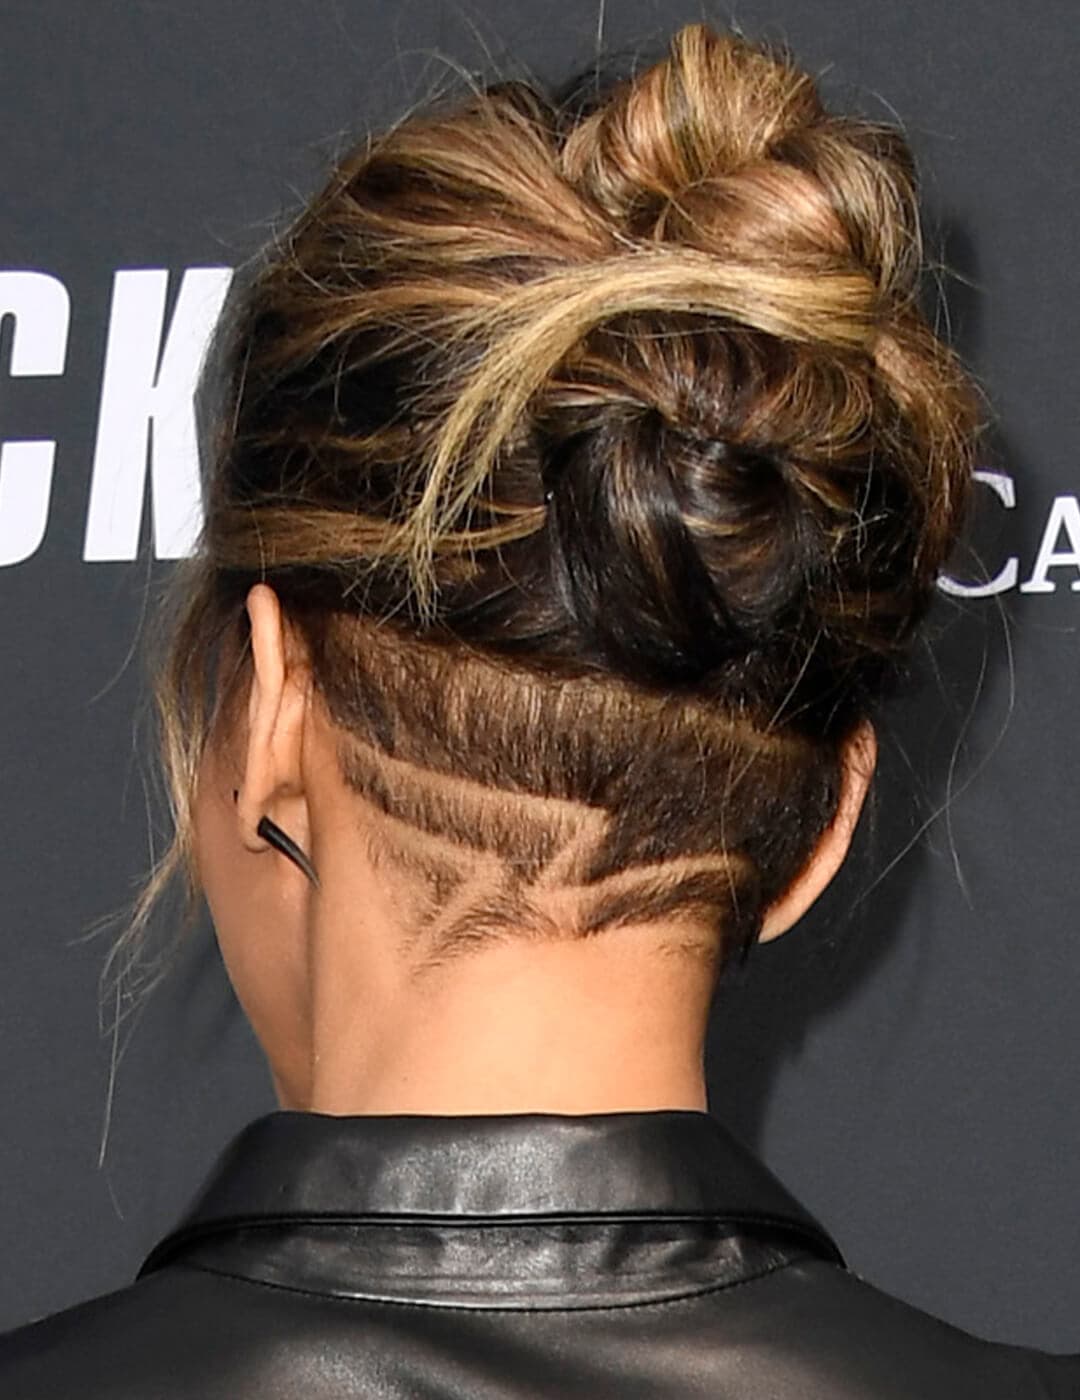 Back view of Halle Berry's updo undercut hairstyle with intricate details